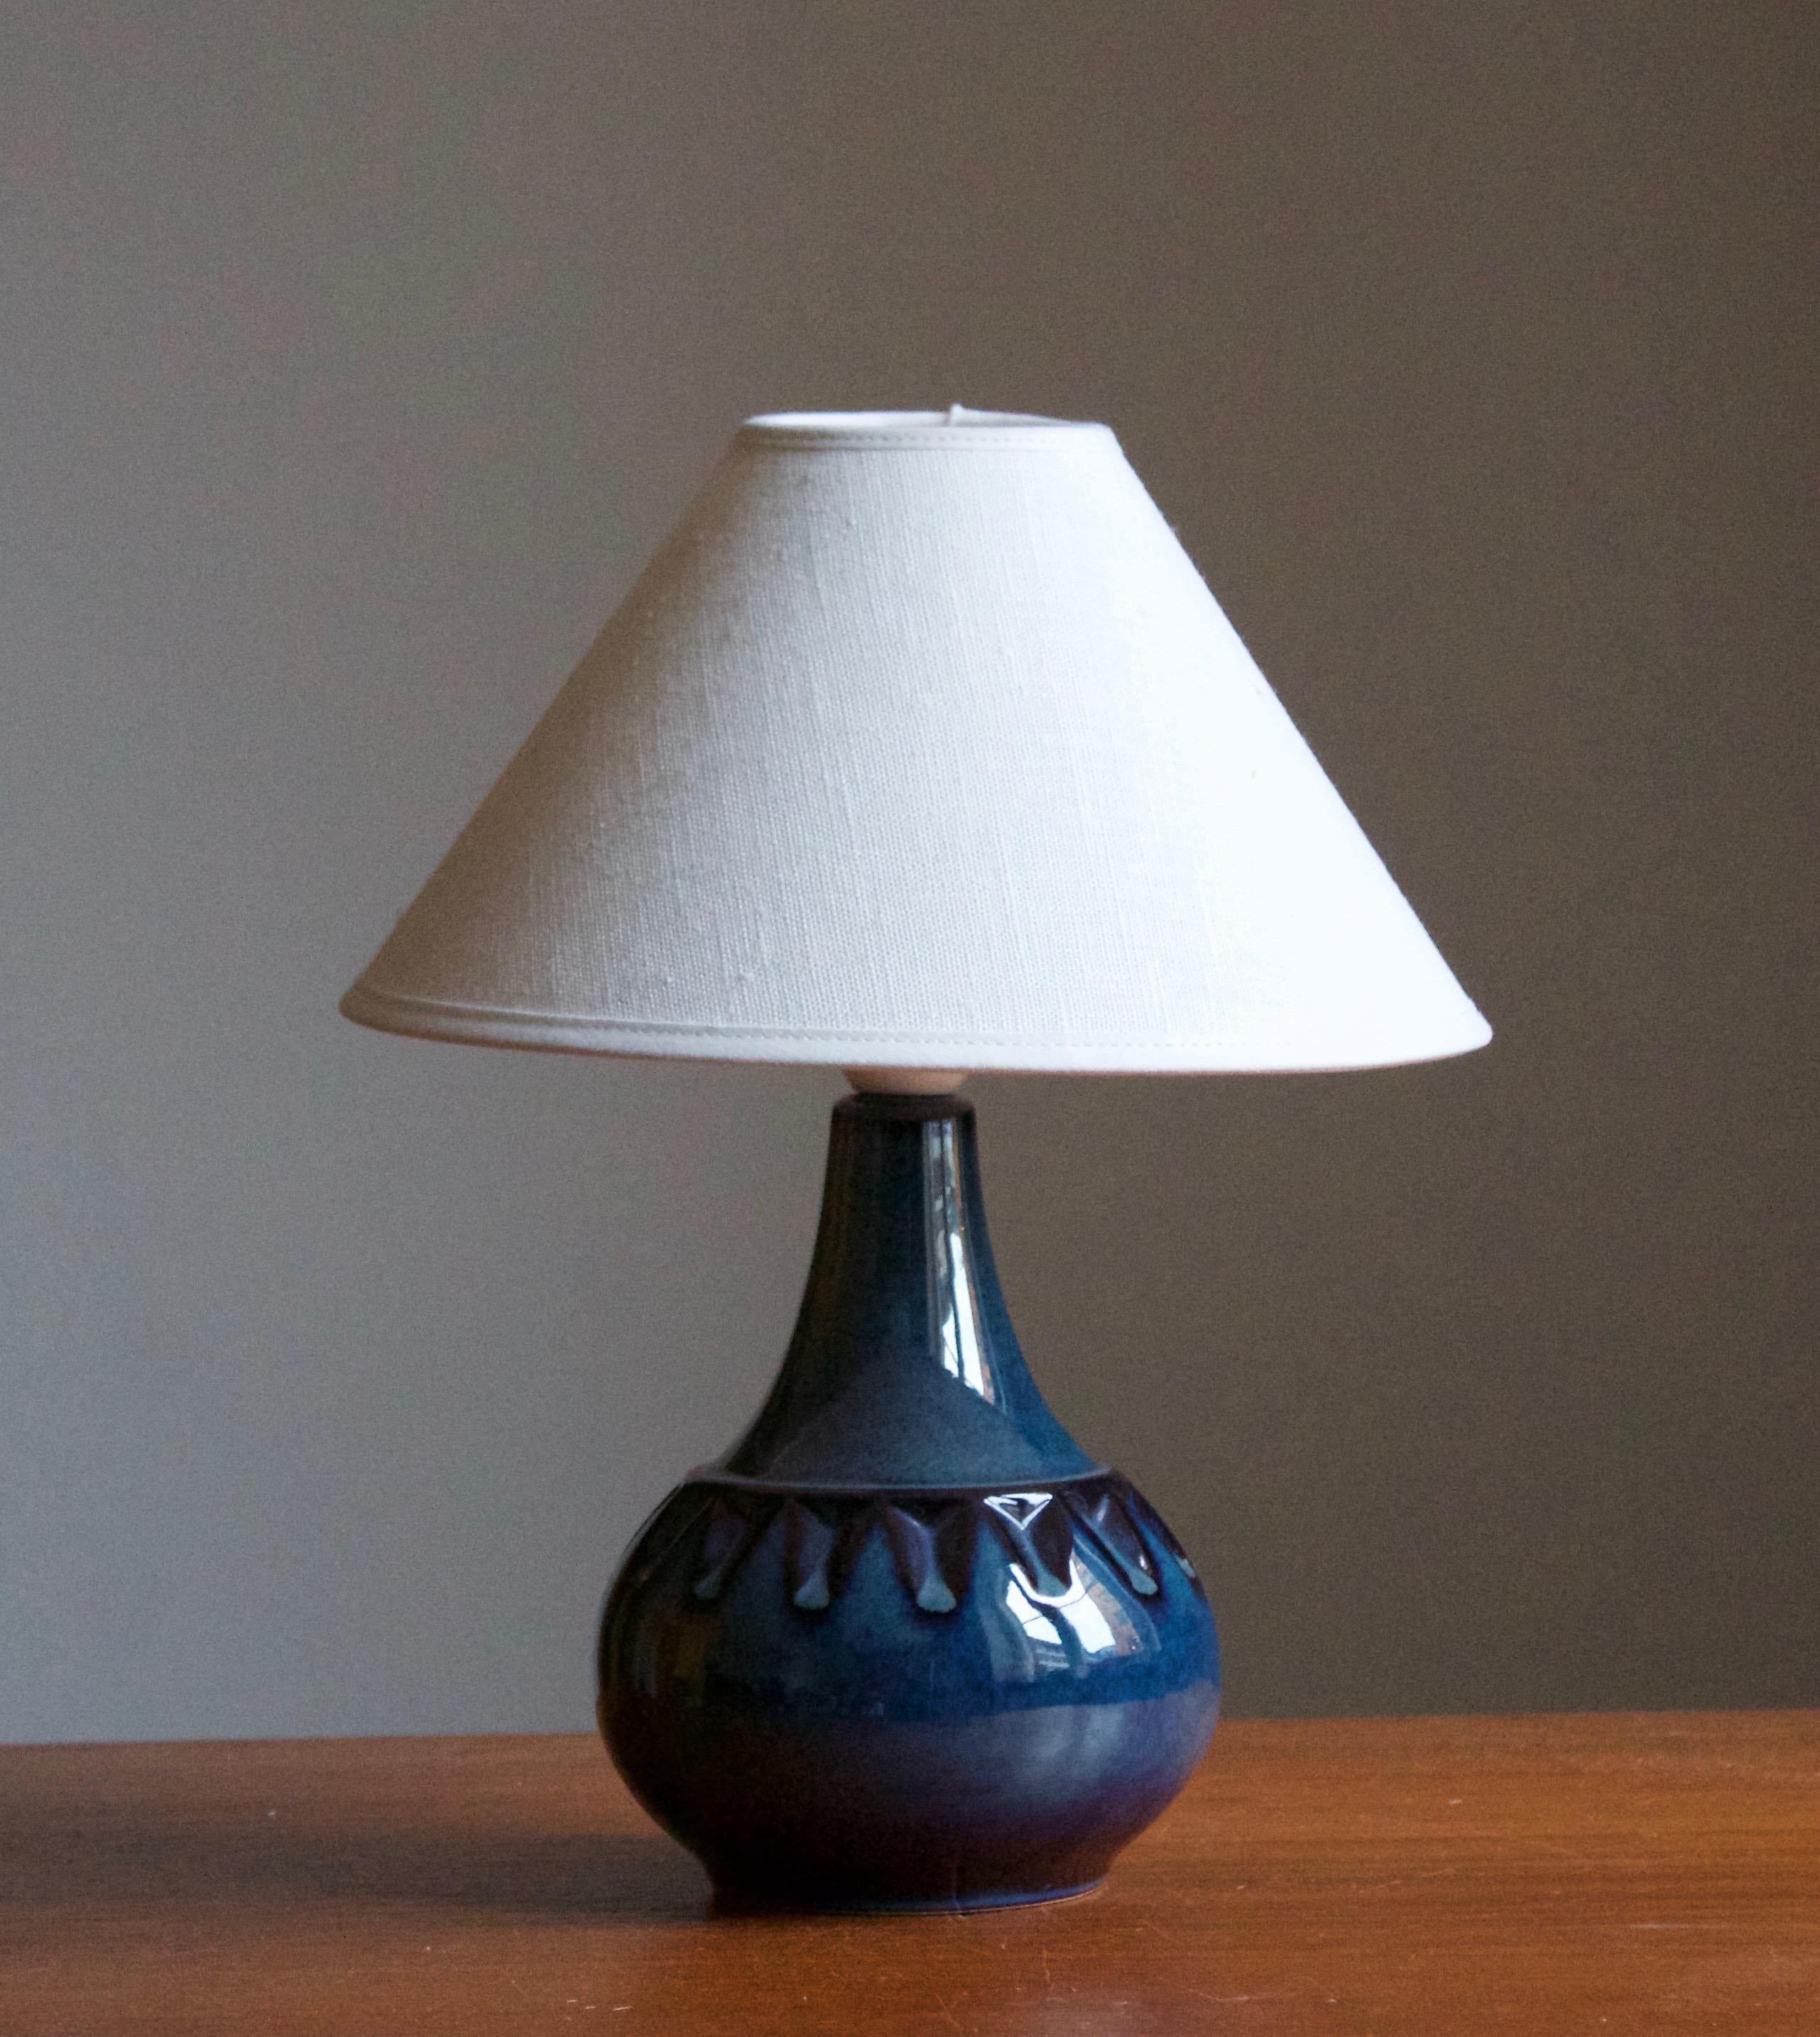 A table lamp produced by Søholm Keramik, located on the island of Bornholm in Denmark. Features a highly artistic glazed and incised decor. 

Sold without lampshade. Stated dimensions exclude the lampshade. Height includes socket.

Other